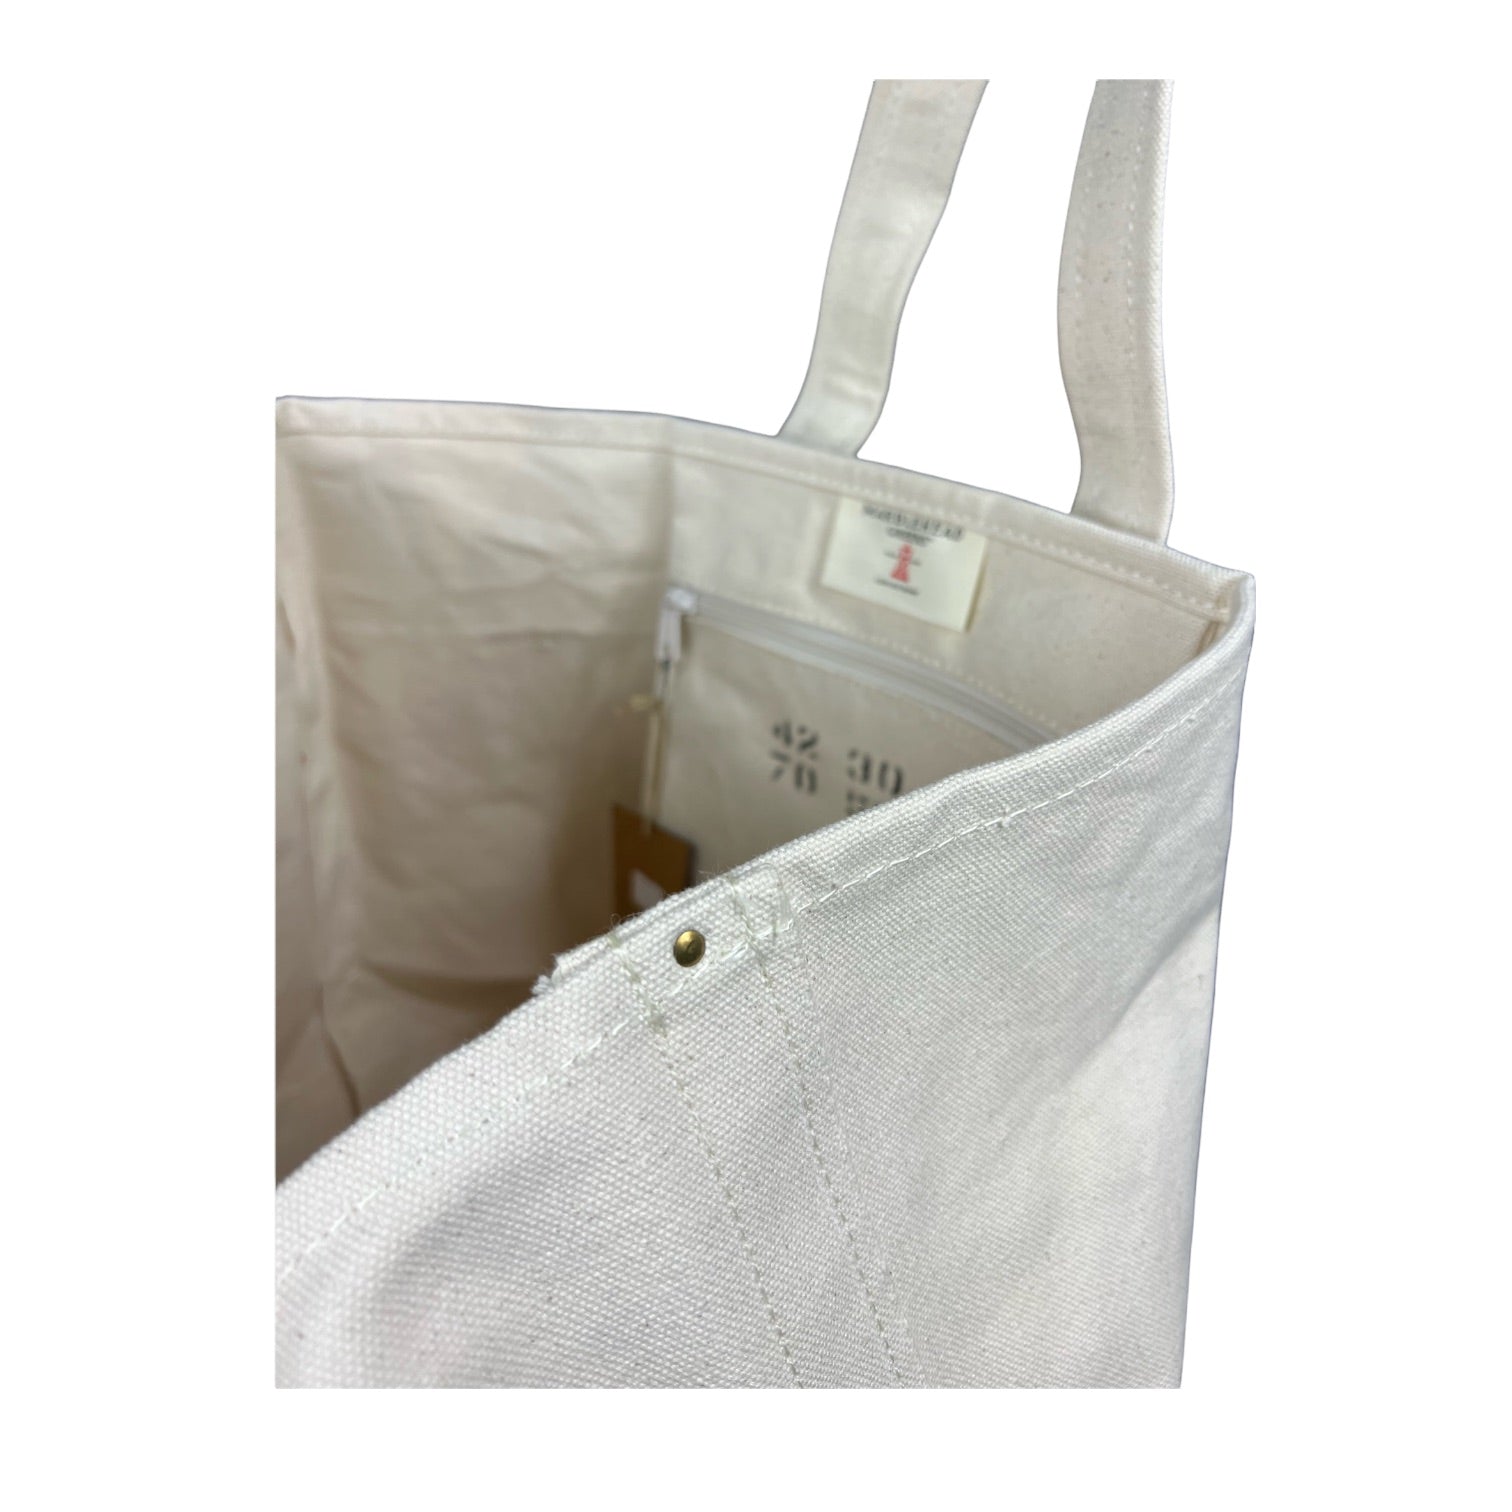 Large Heavy Duty Tote - Natural